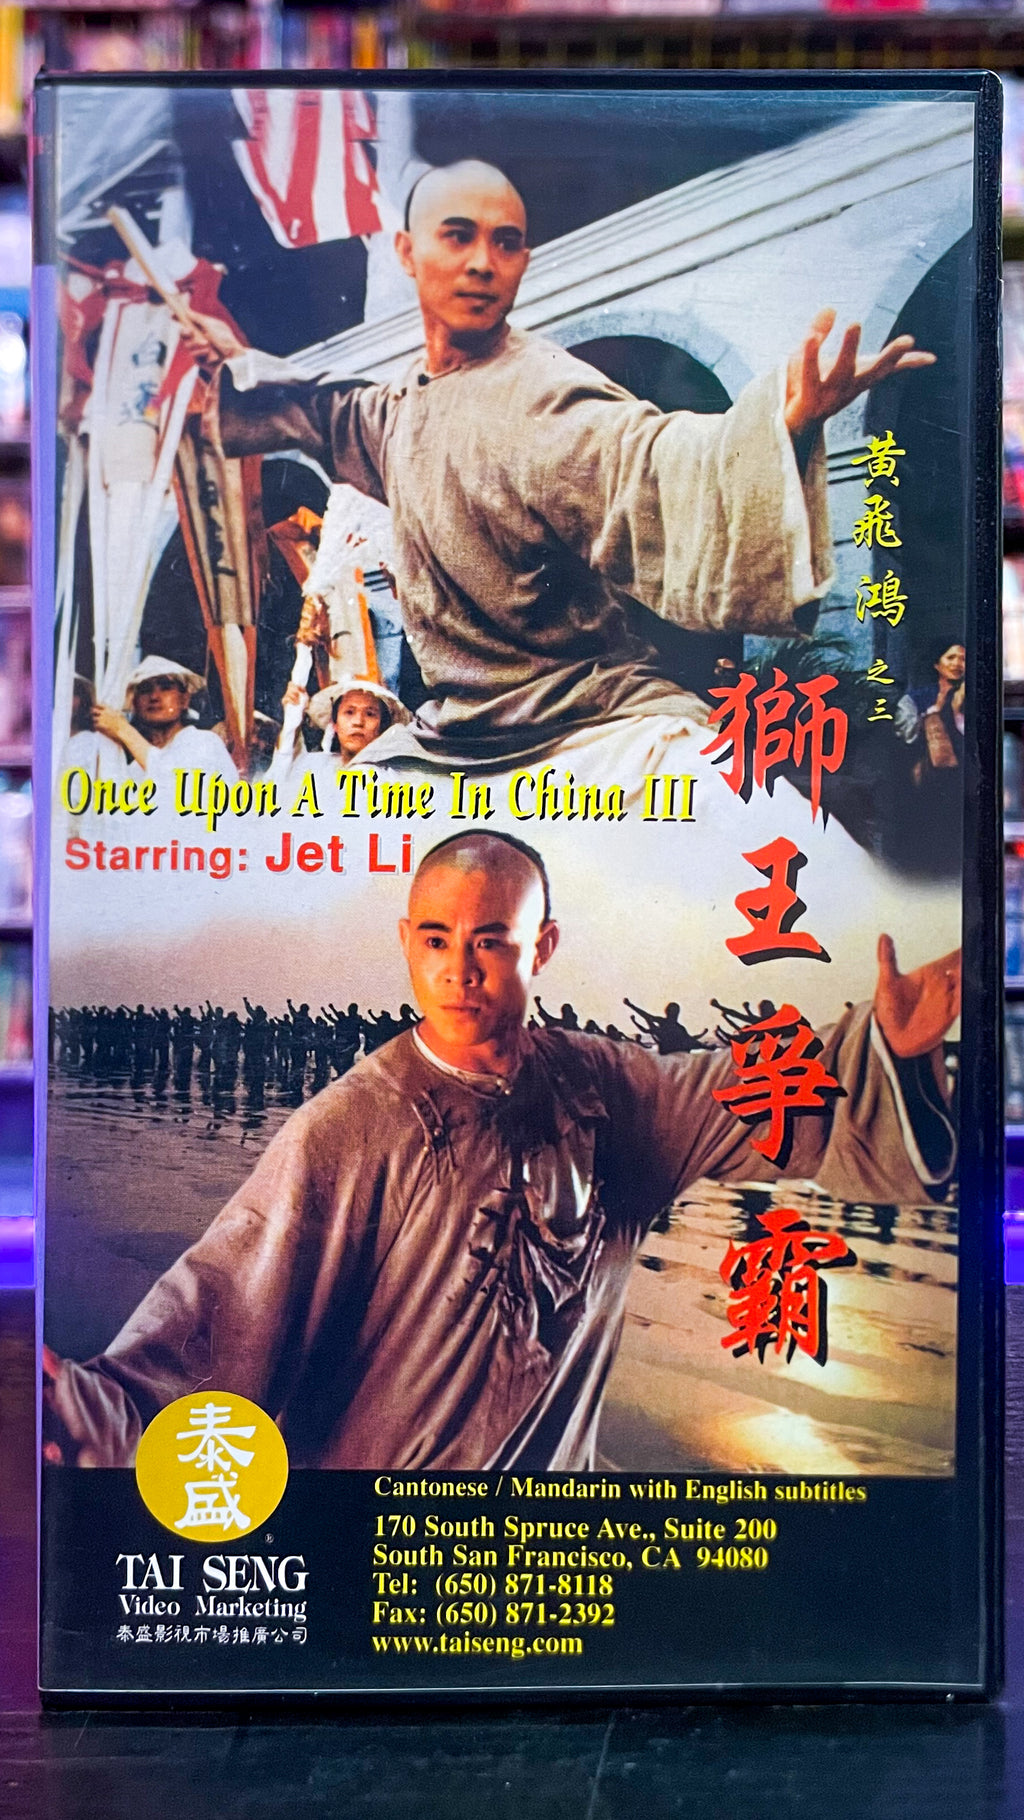 Once Upon A Time in China III